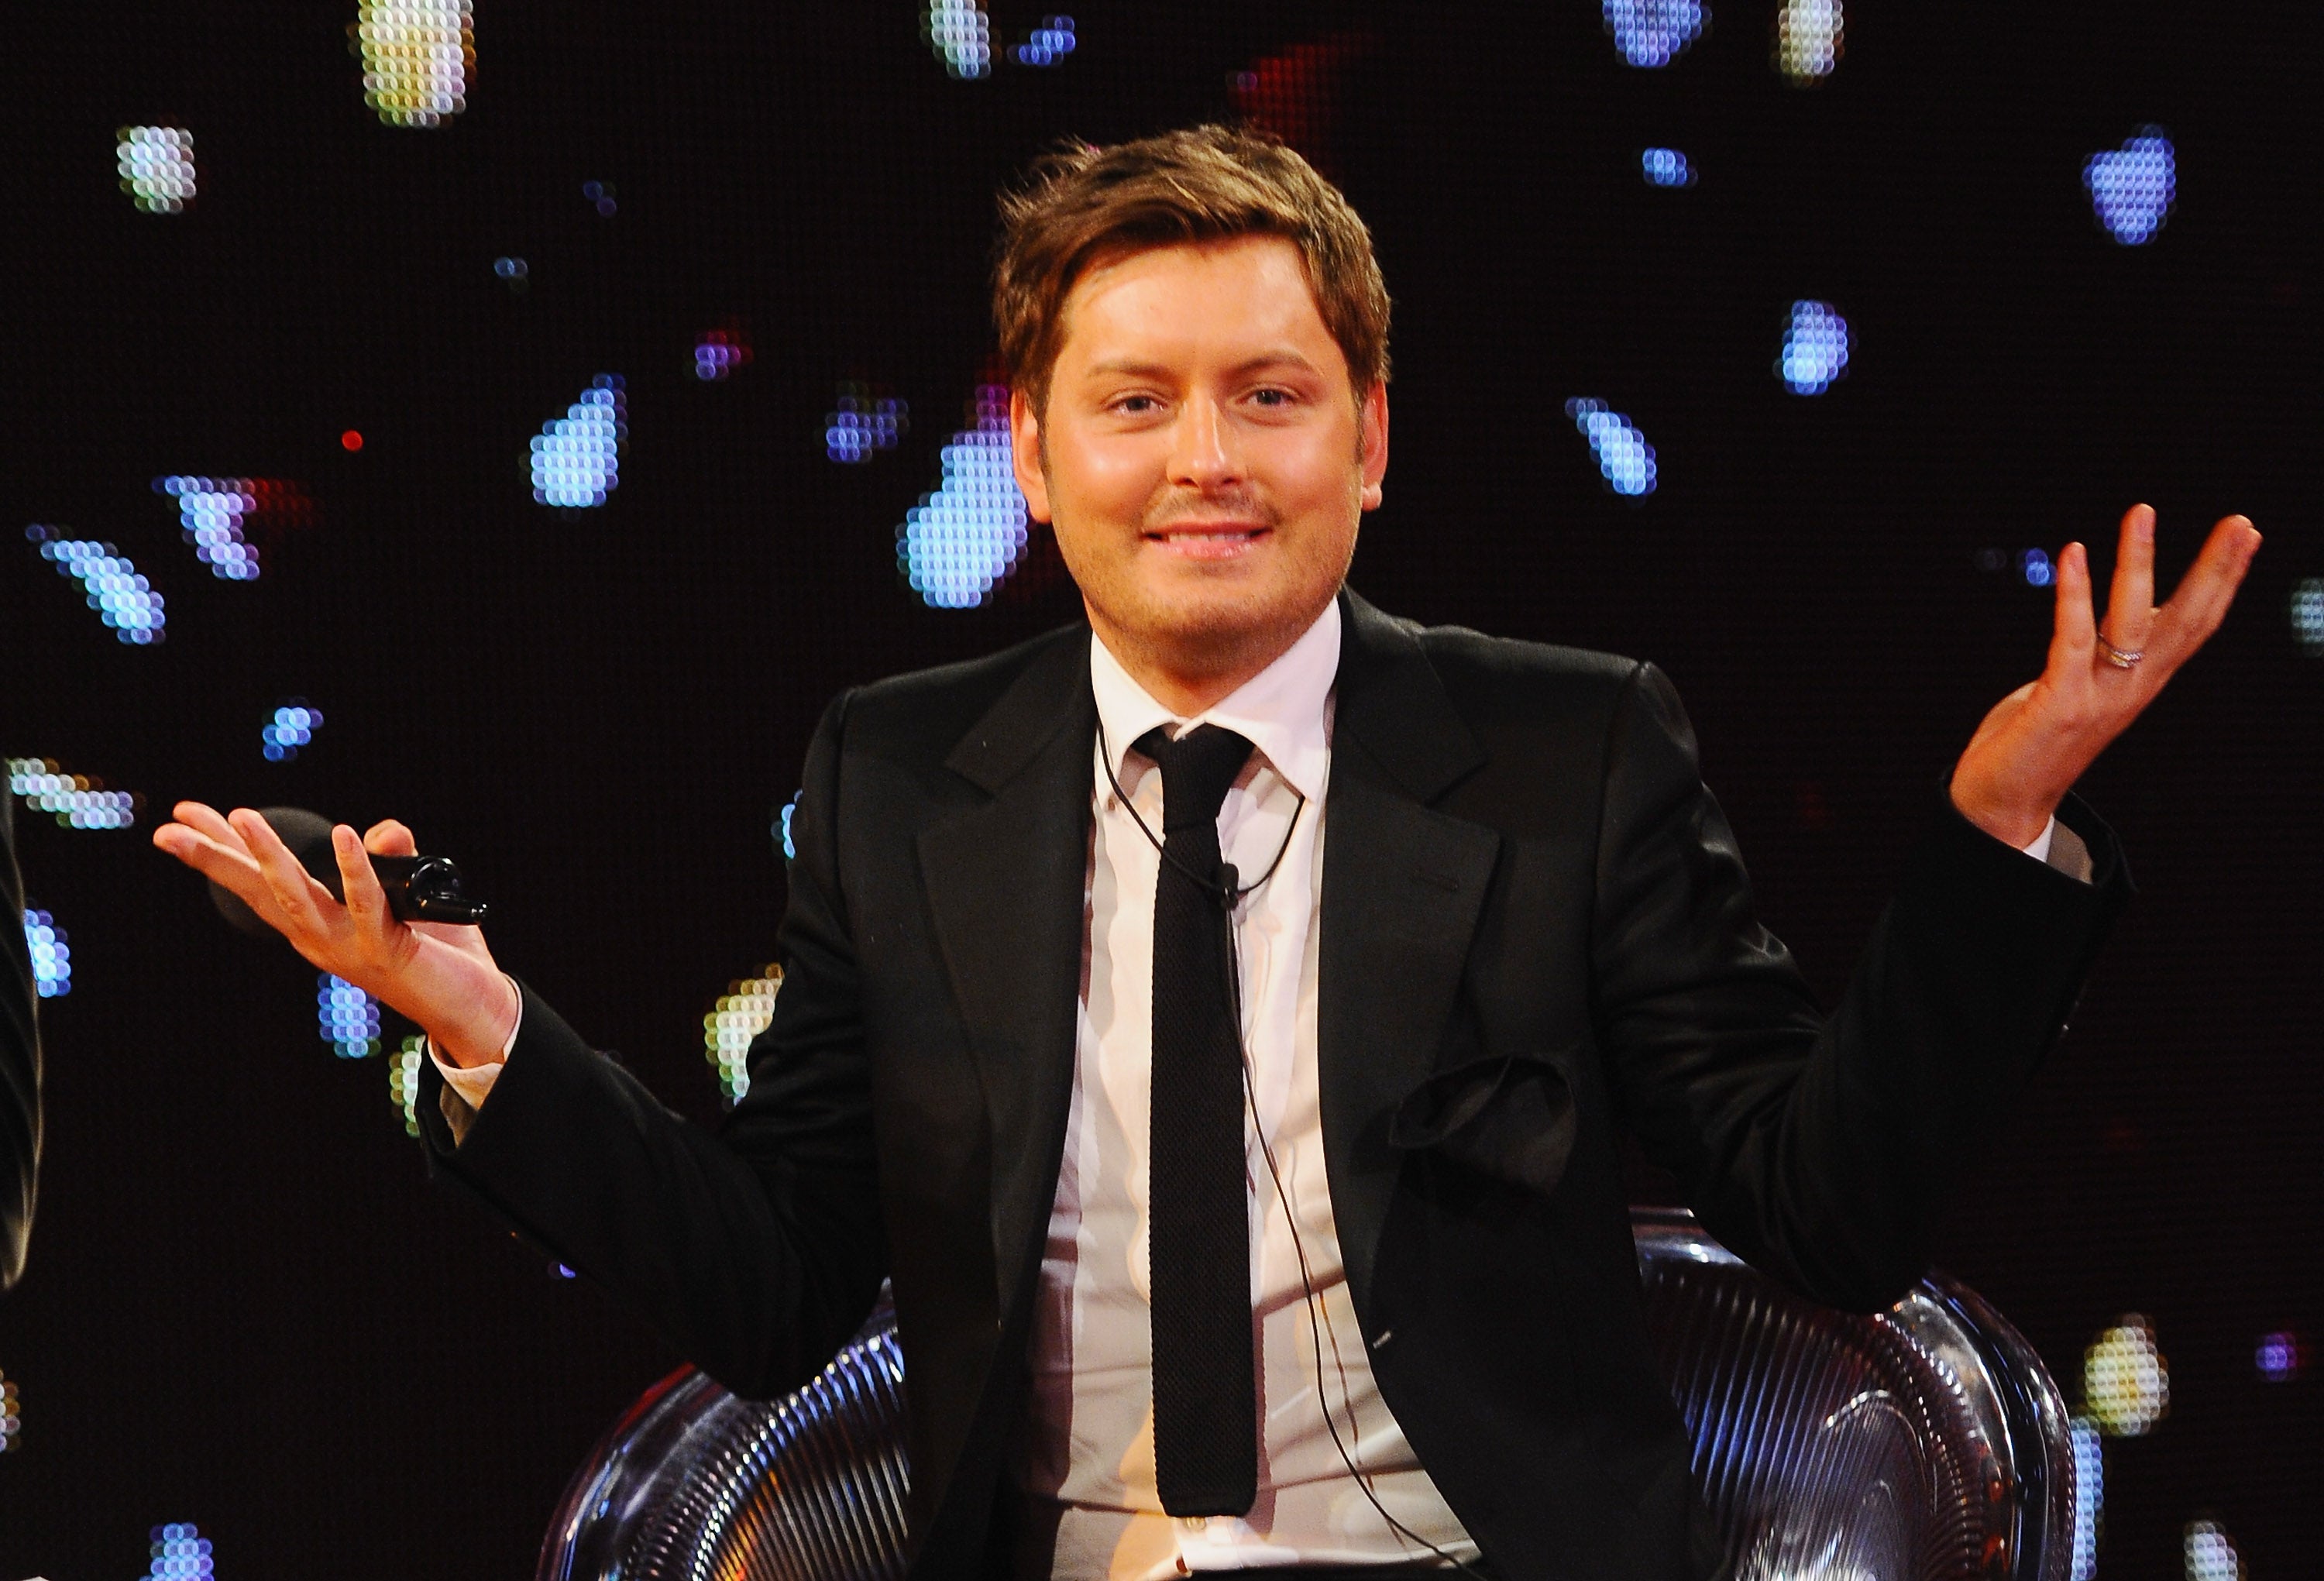 Brian Dowling after winning the final of ‘Ultimate Big Brother’, September 2010